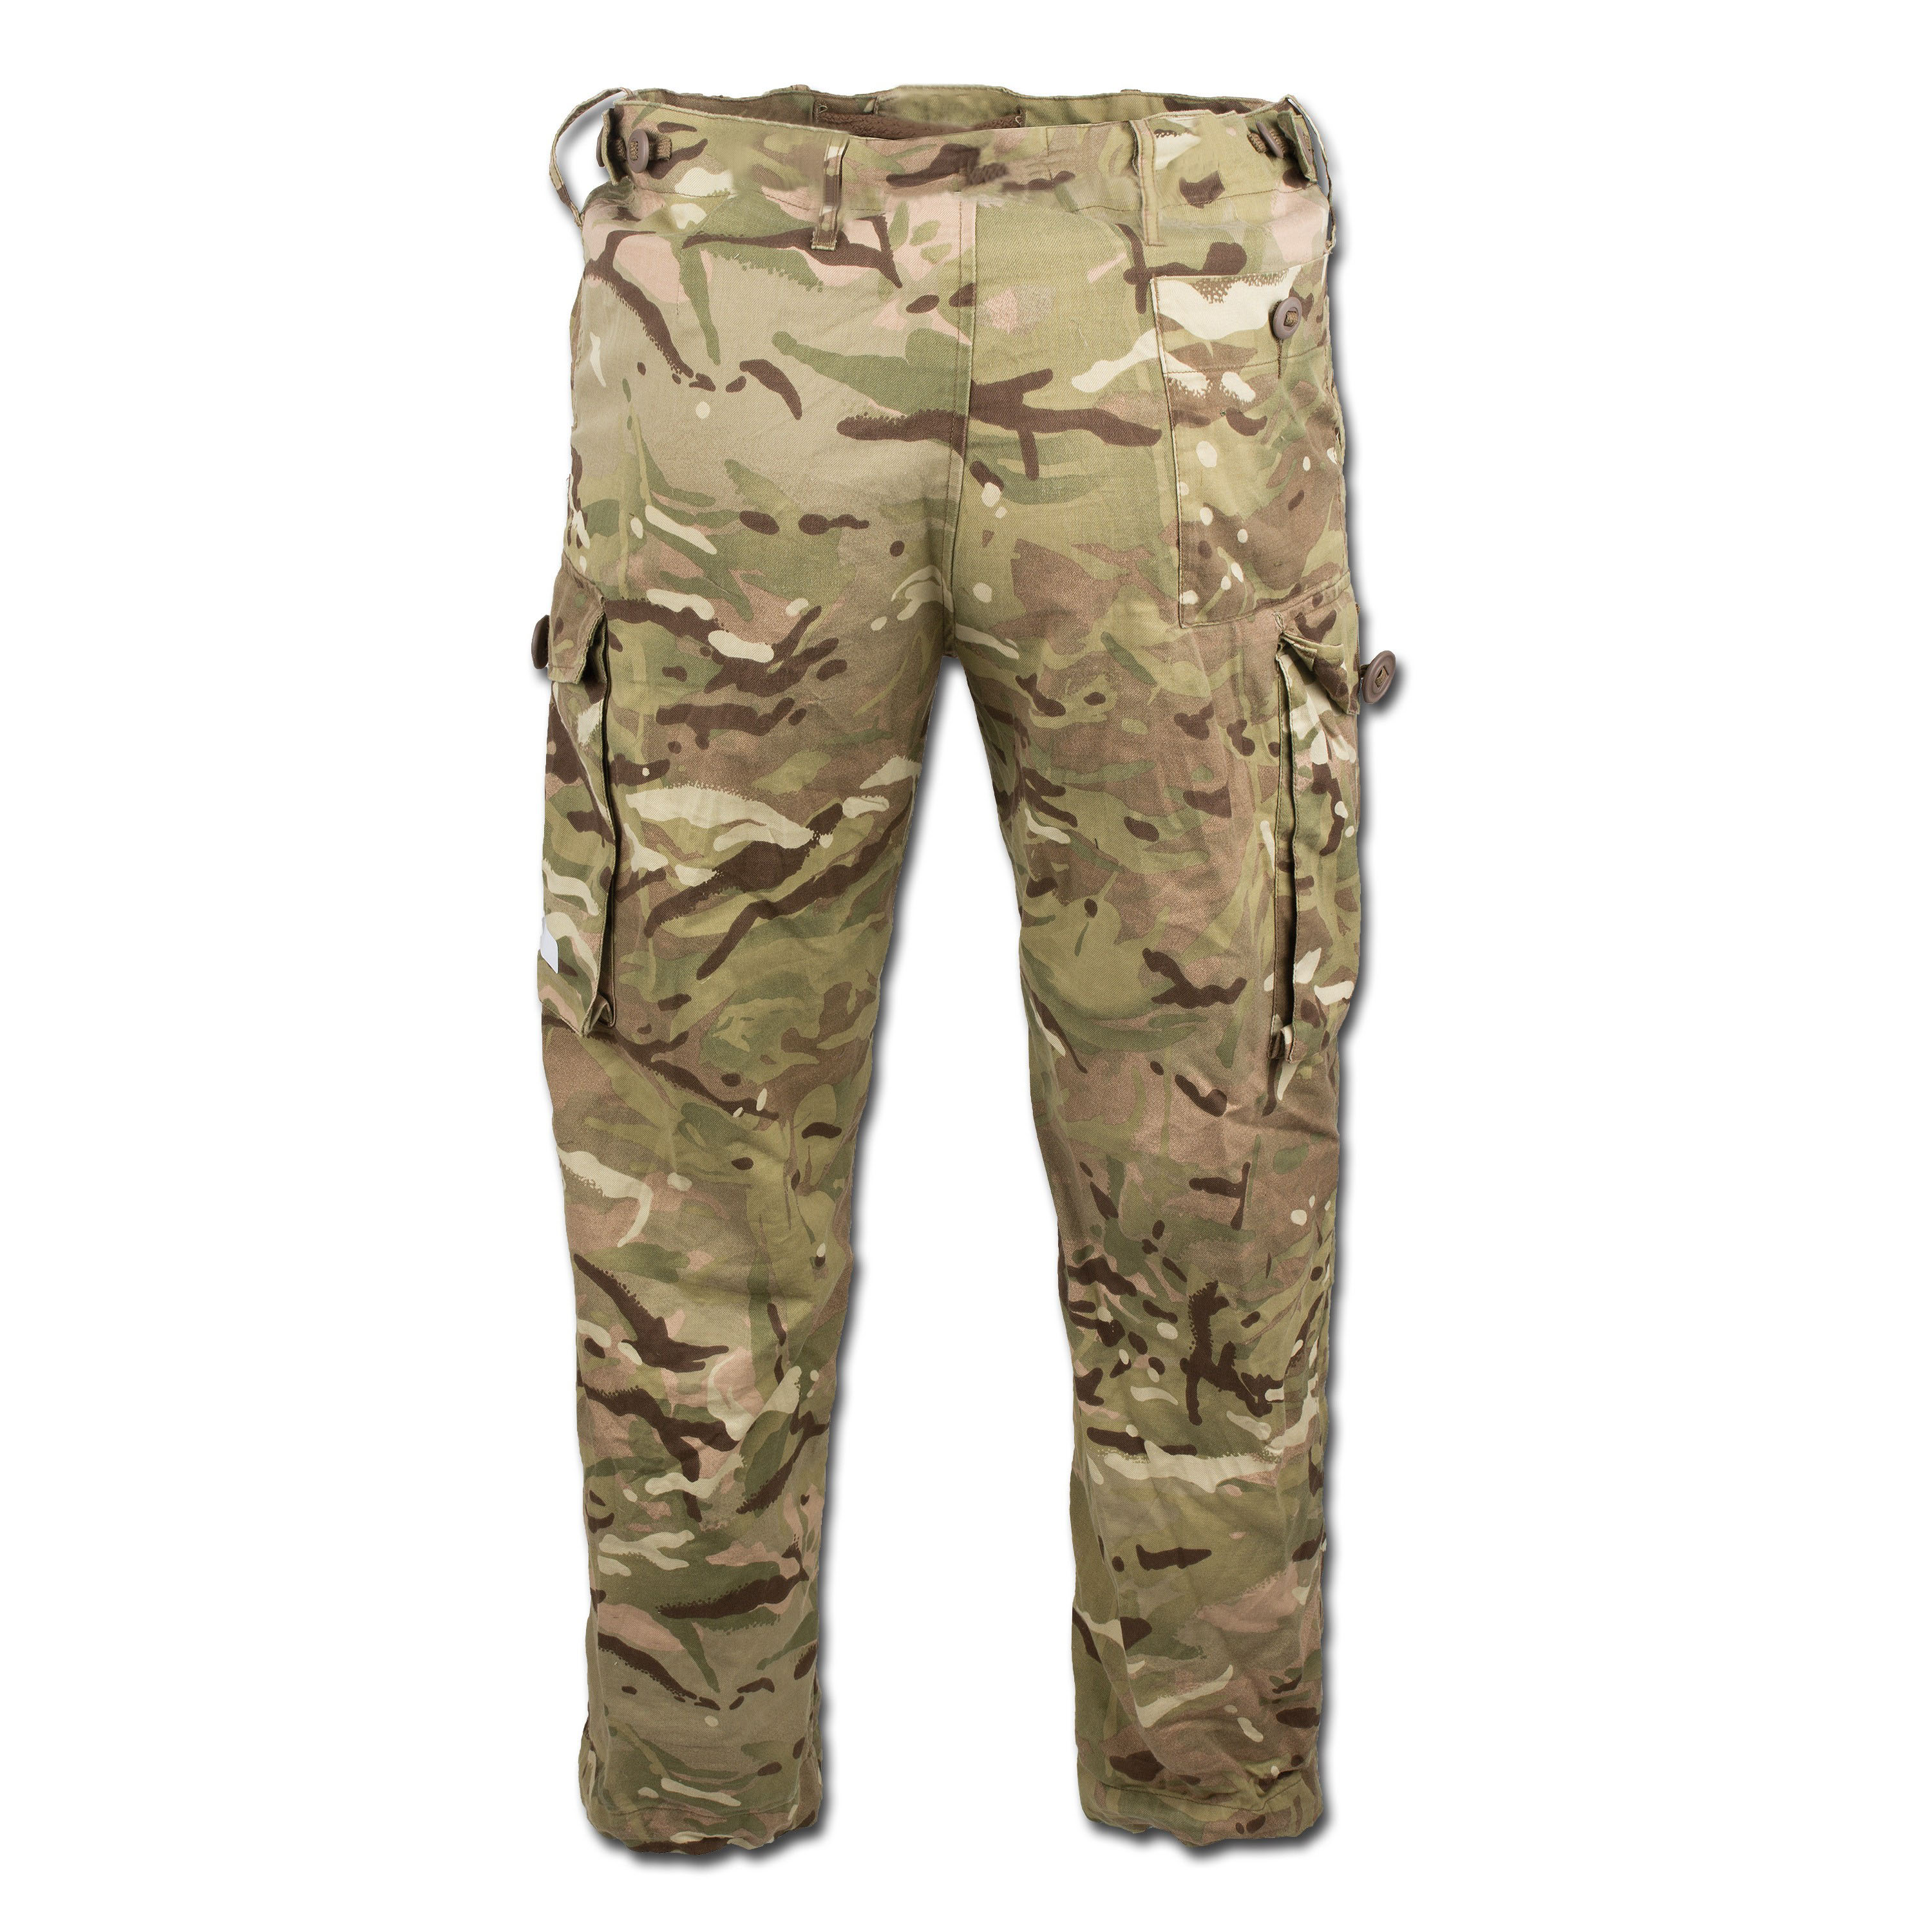 Purchase the British Field Trousers Tropen Used MTP camo by ASMC